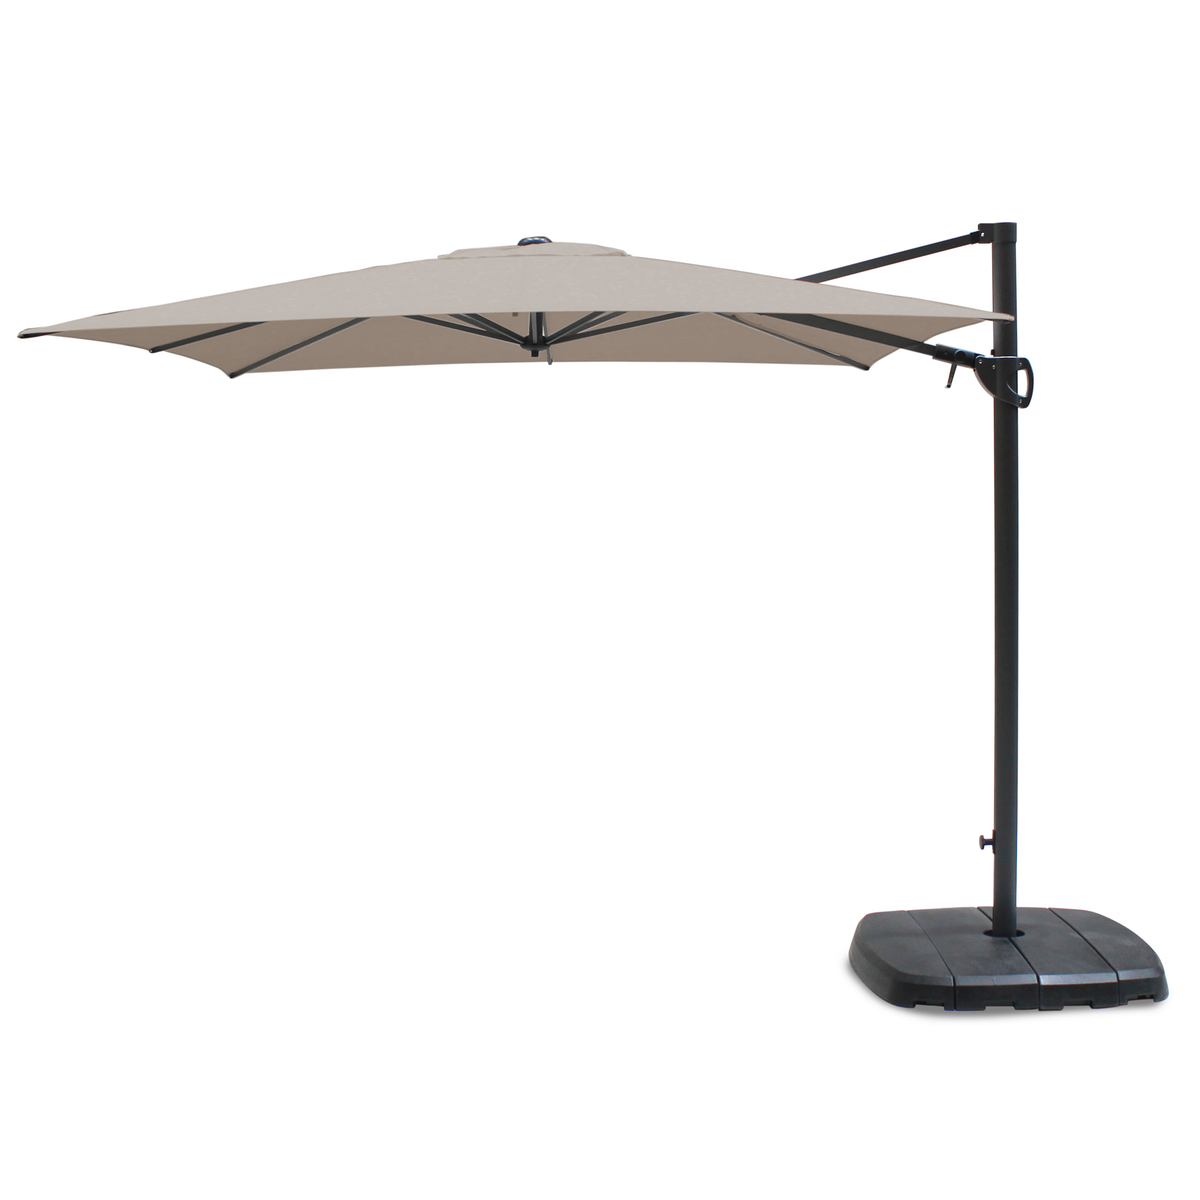 Kettler Stone 2.5m Square Free Arm Cantilever Parasol with Base